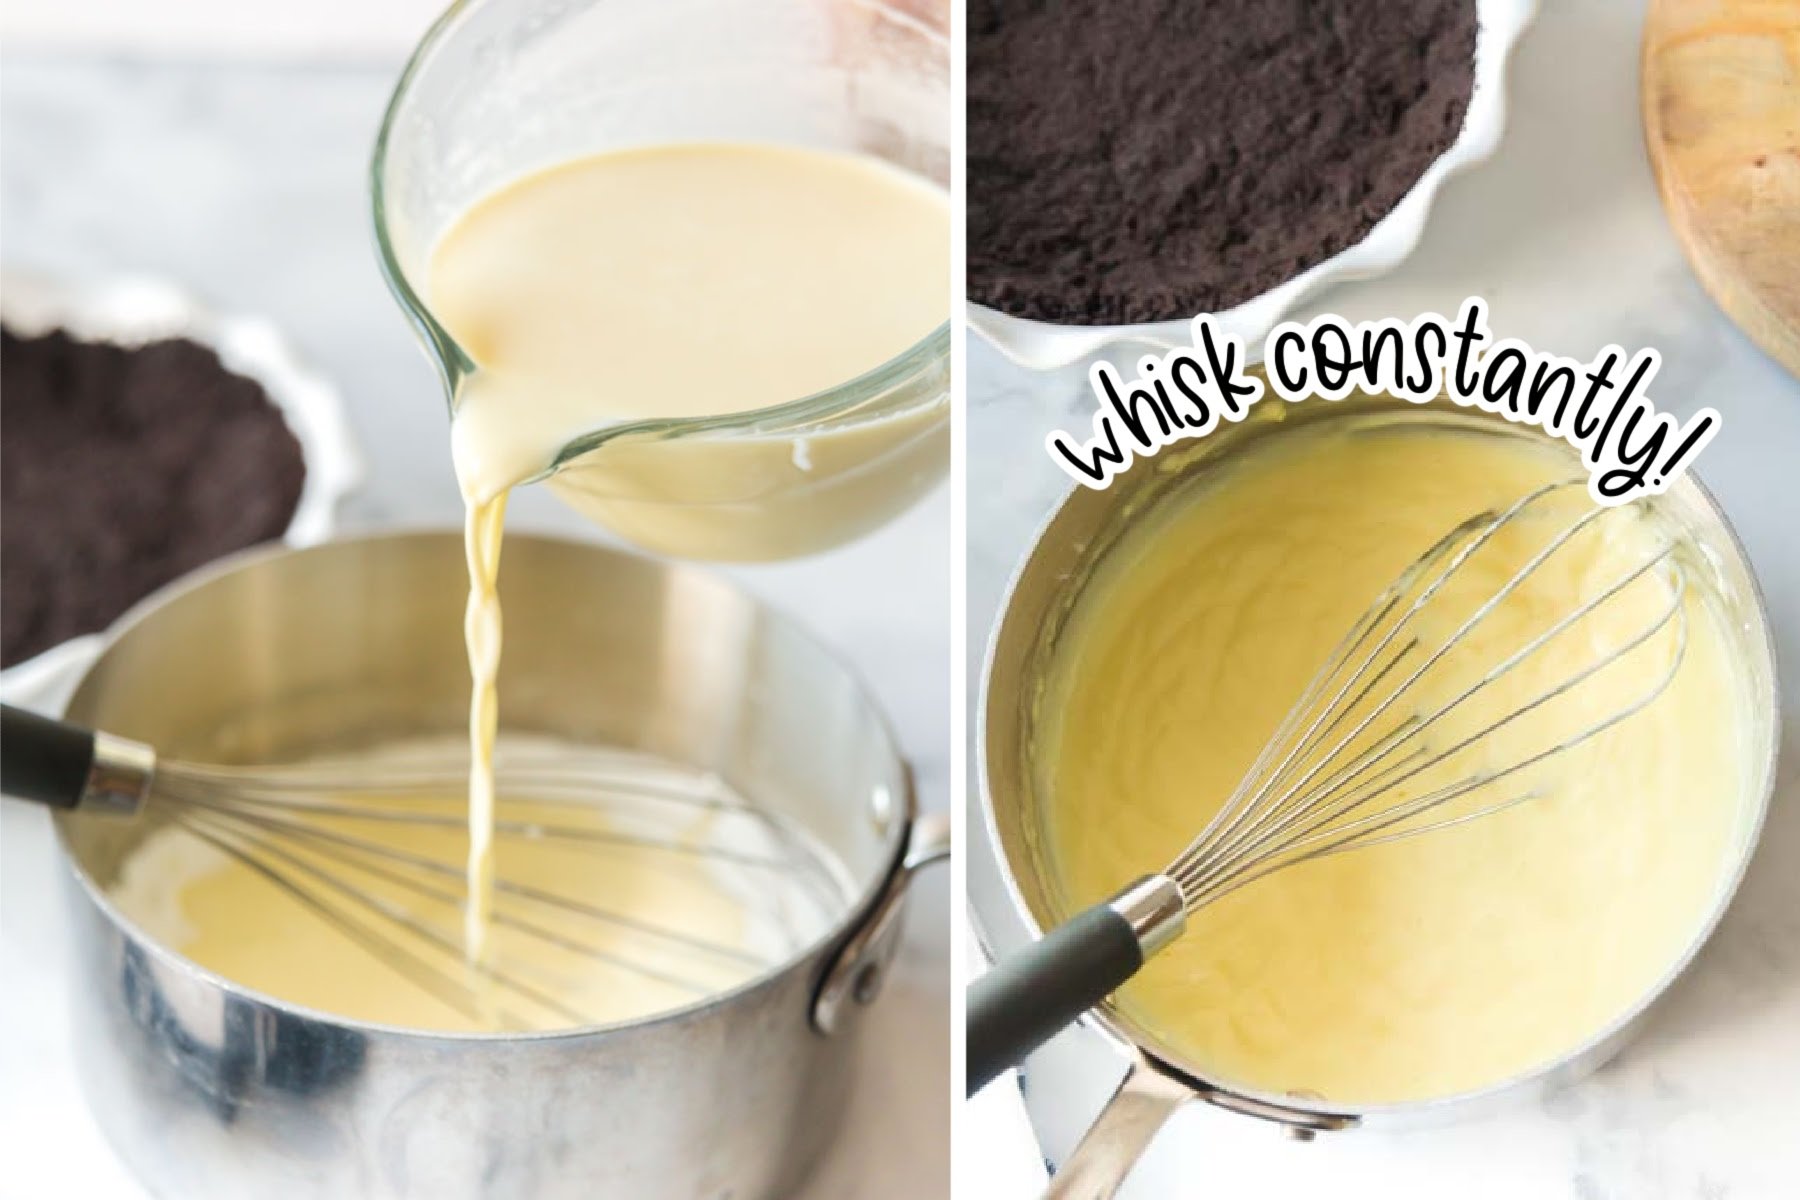 Pouring cream and egg mixture into saucepan and whisking the mixture with text "whisk constantly."